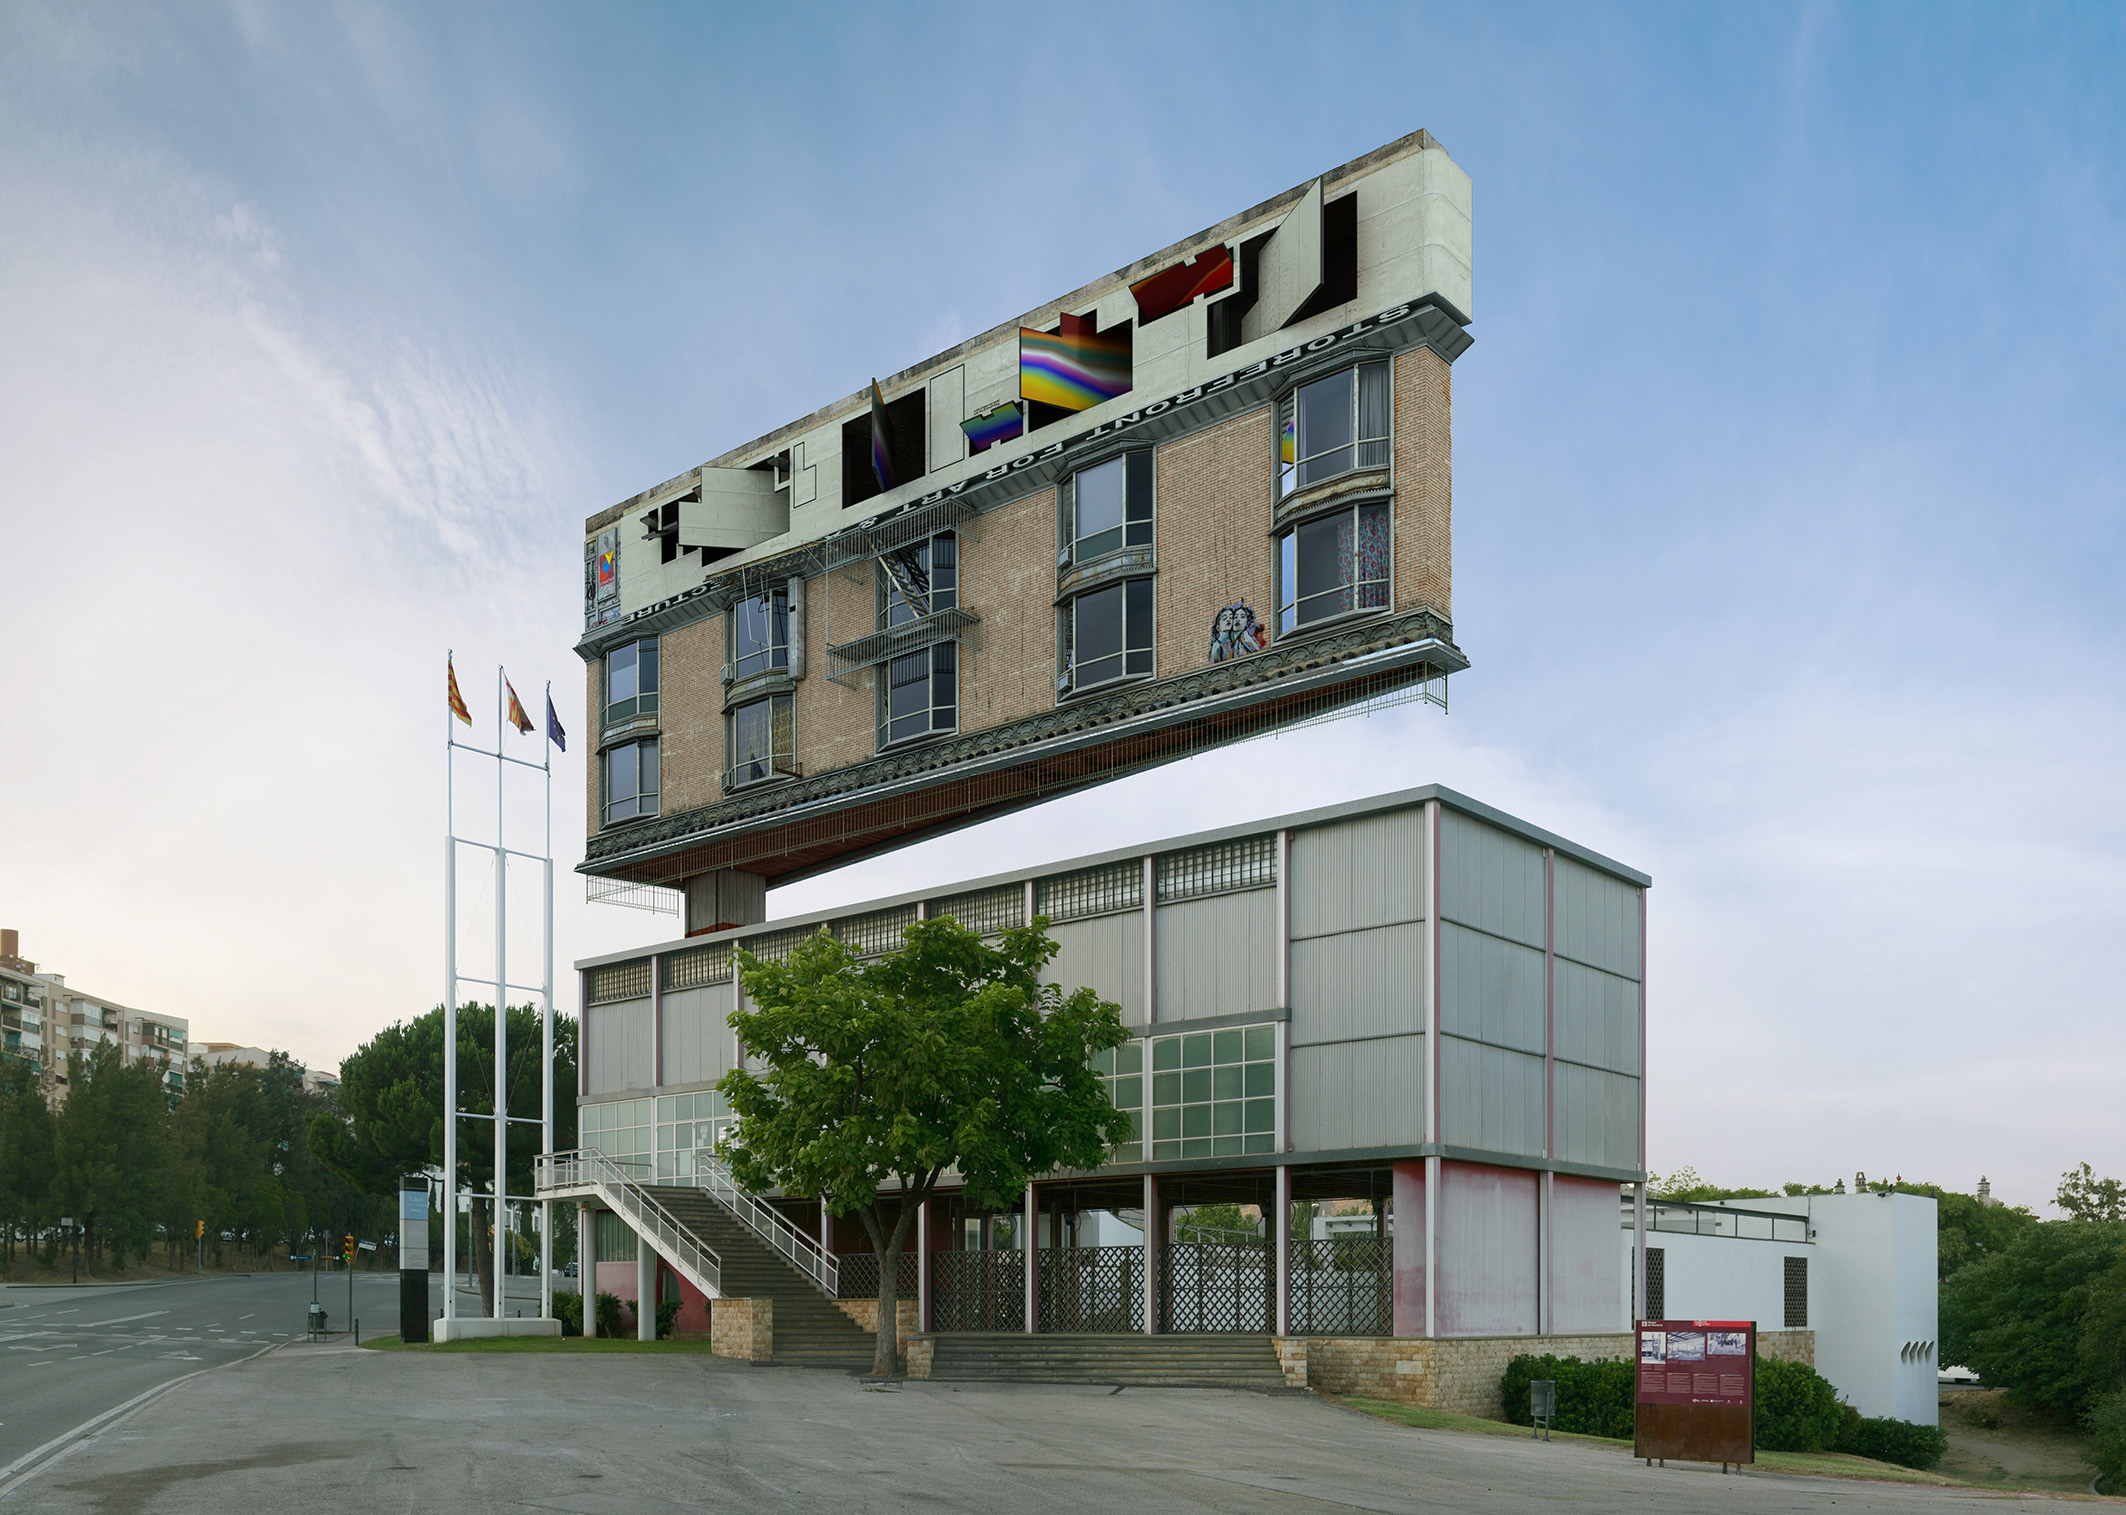 General 2126x1515 architecture building Victor Enrich surreal photoshopped digital art photo manipulation trees road window billboards